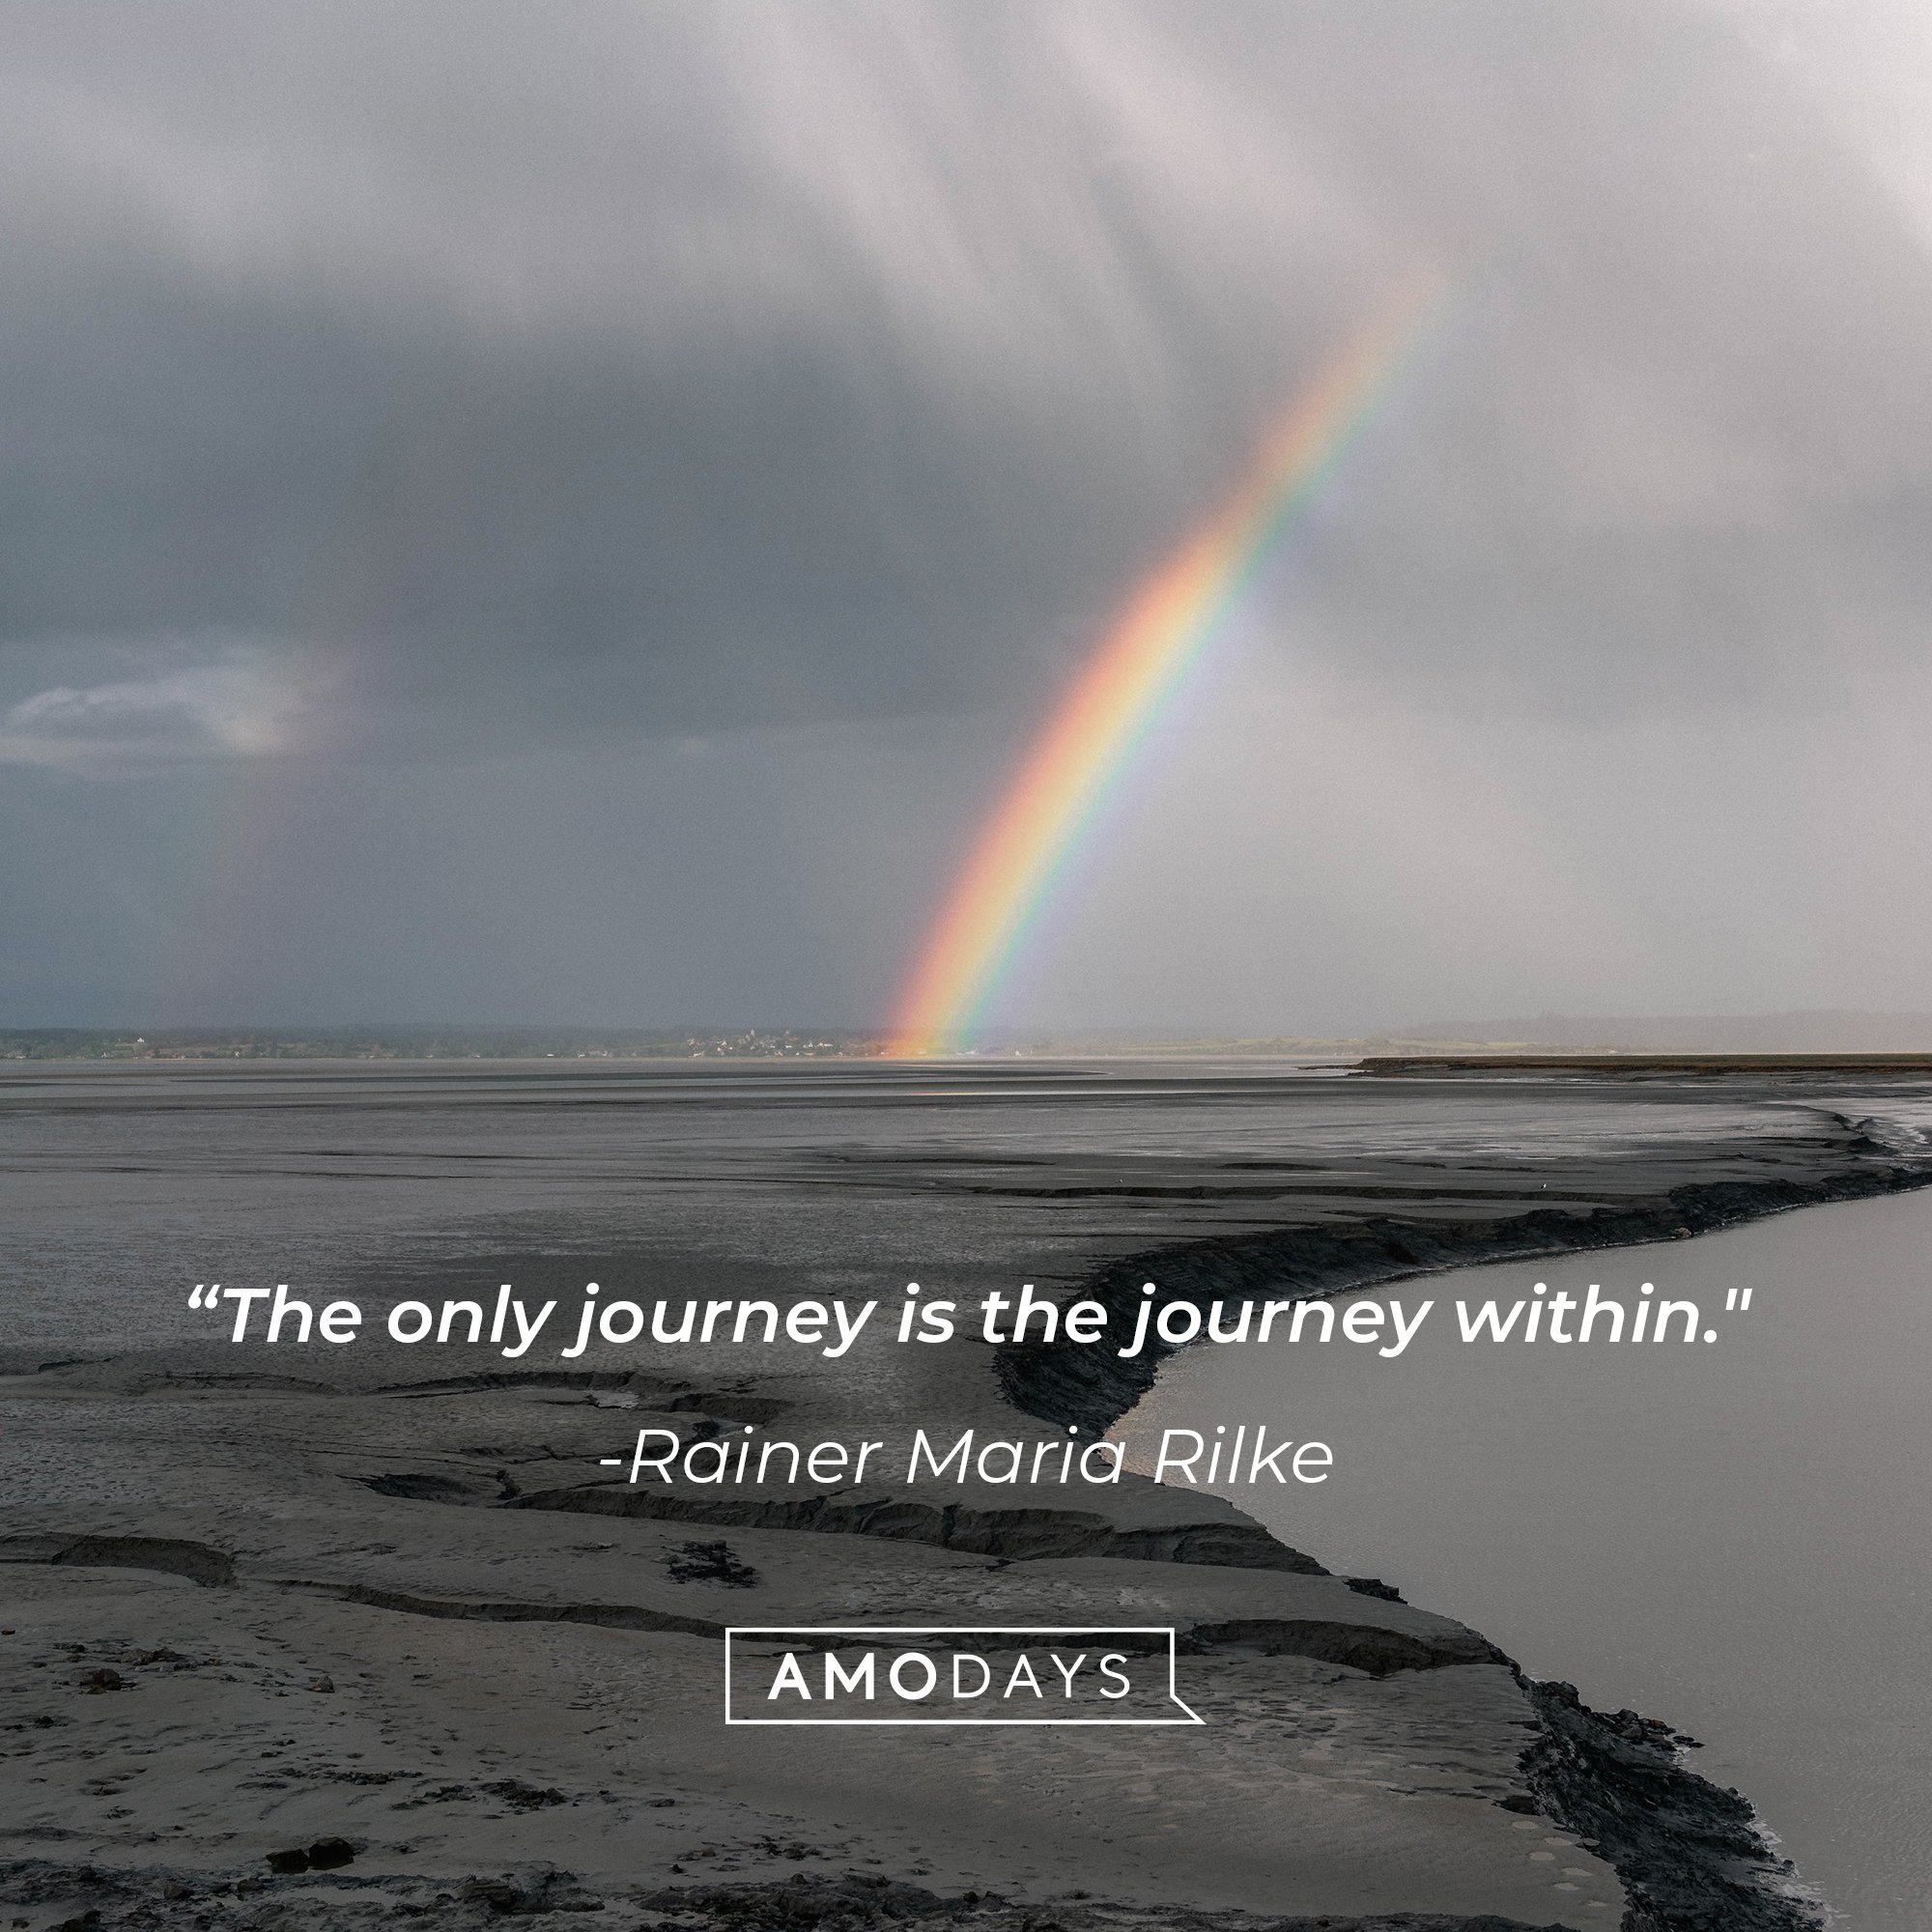 Rainer Maria Rilke's quote: “The only journey is the journey within." | Image: AmoDays